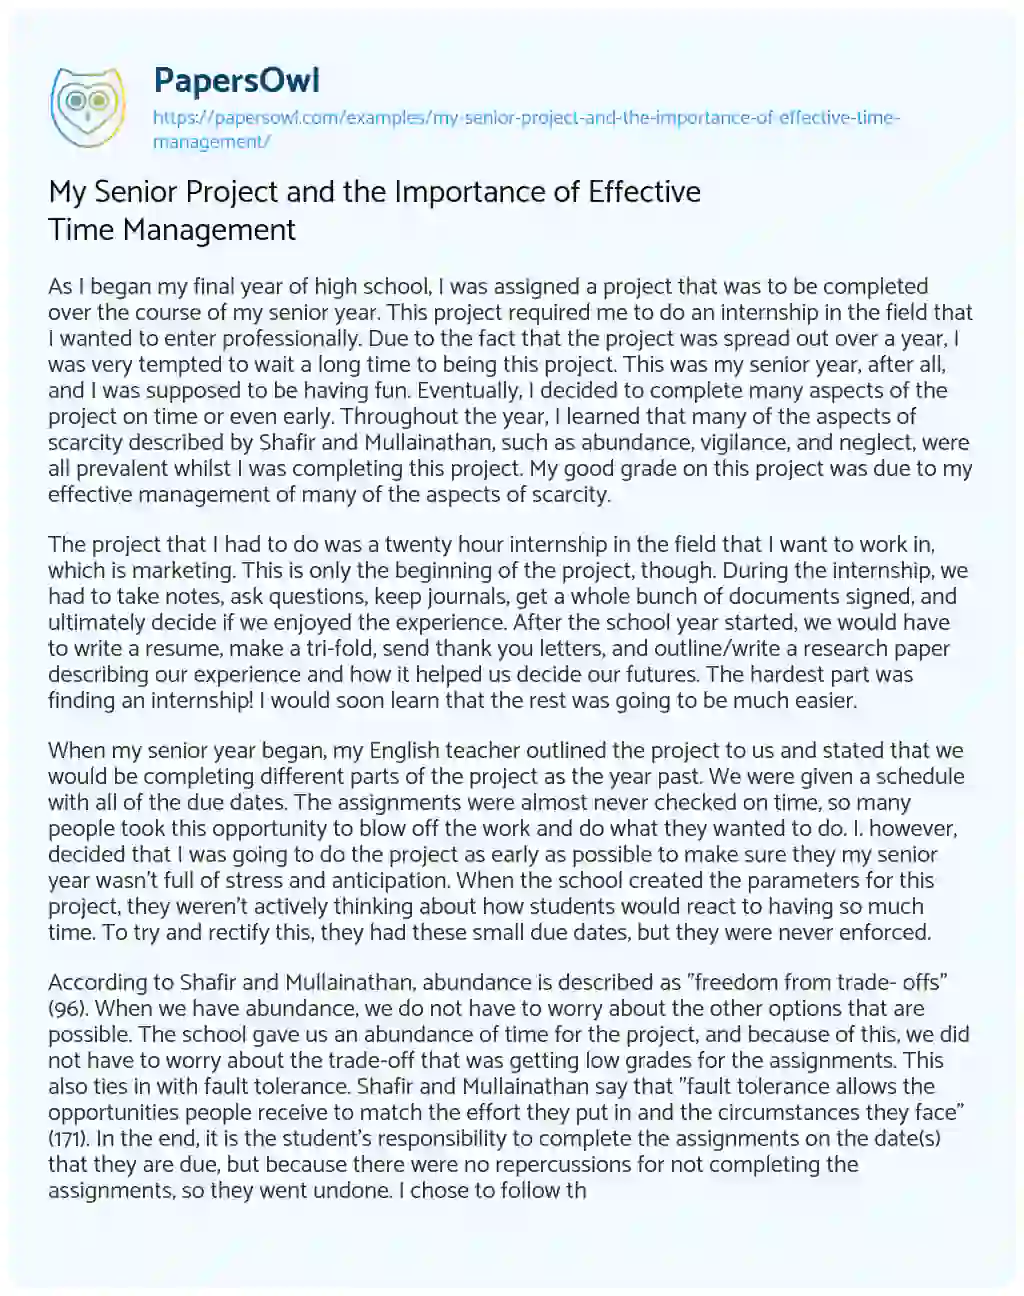 Essay on My Senior Project and the Importance of Effective Time Management